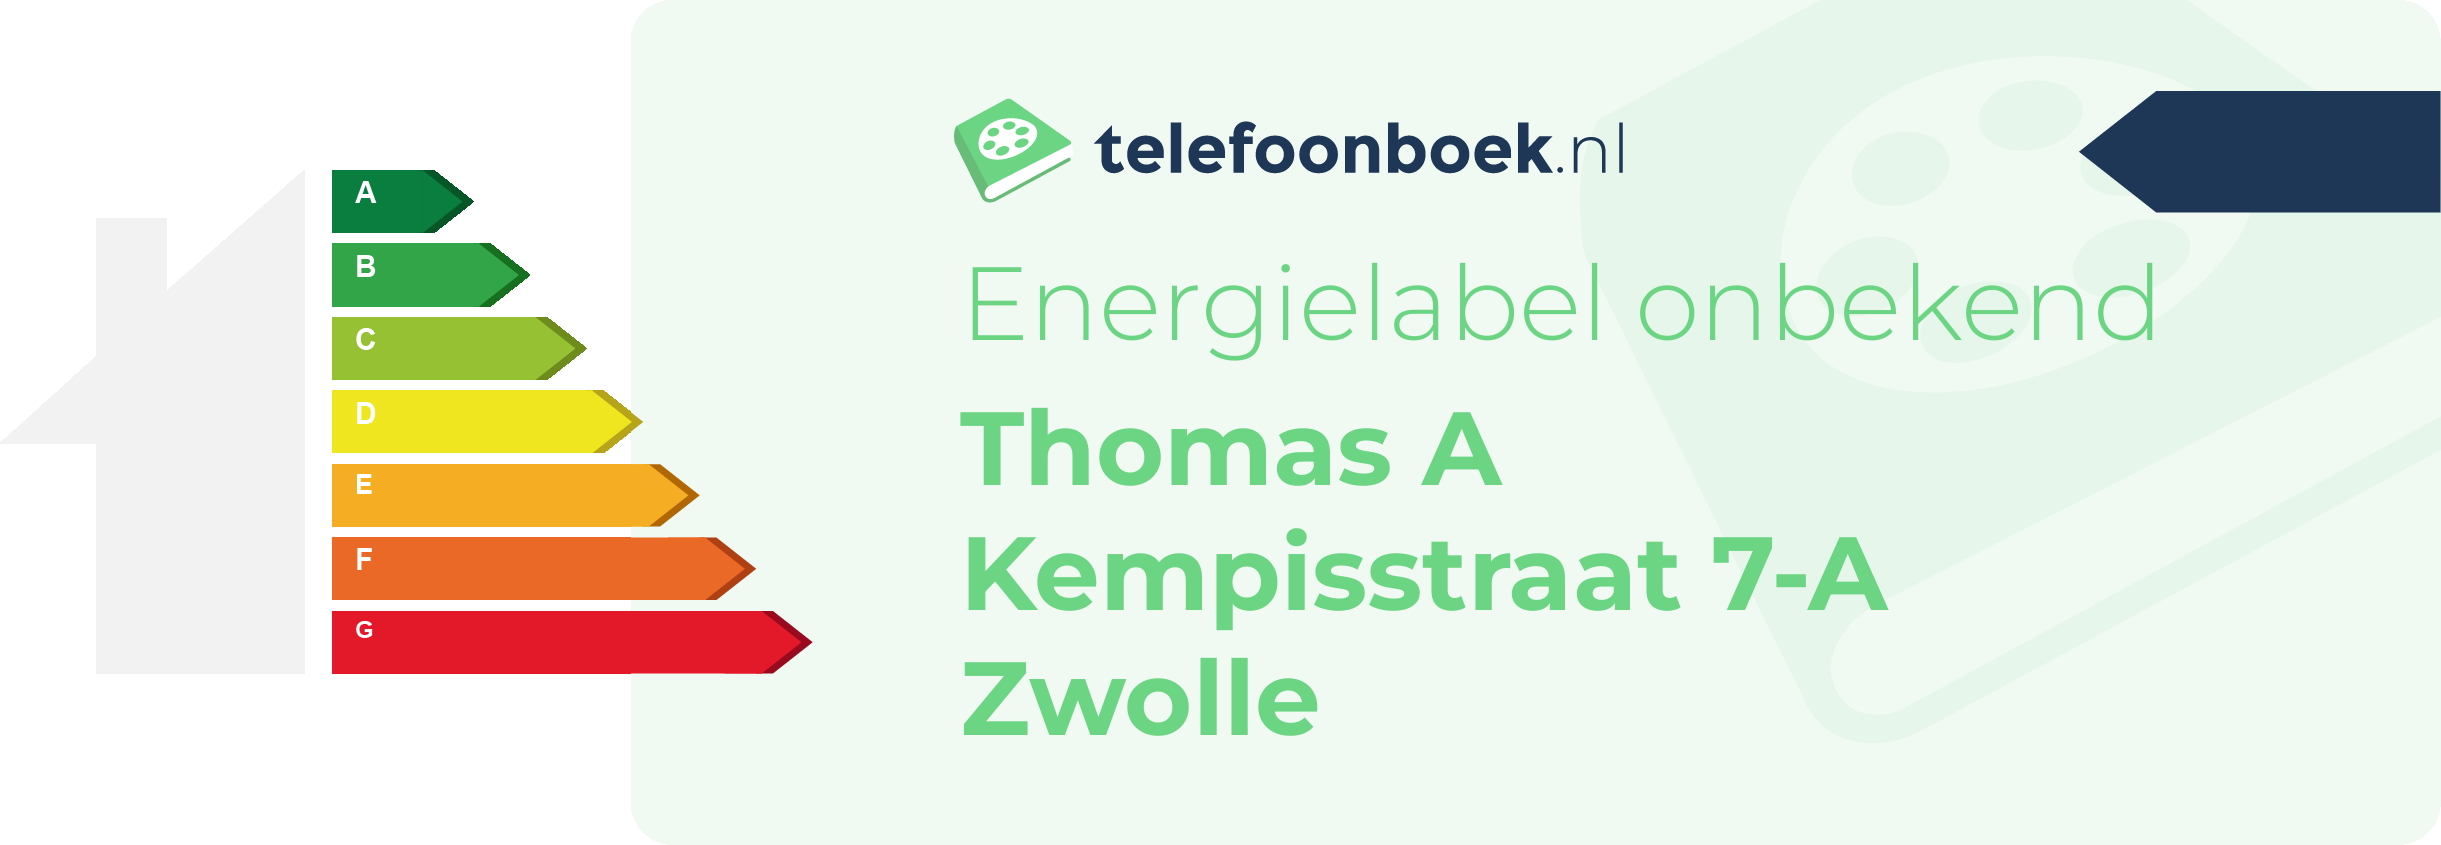 Energielabel Thomas A Kempisstraat 7-A Zwolle